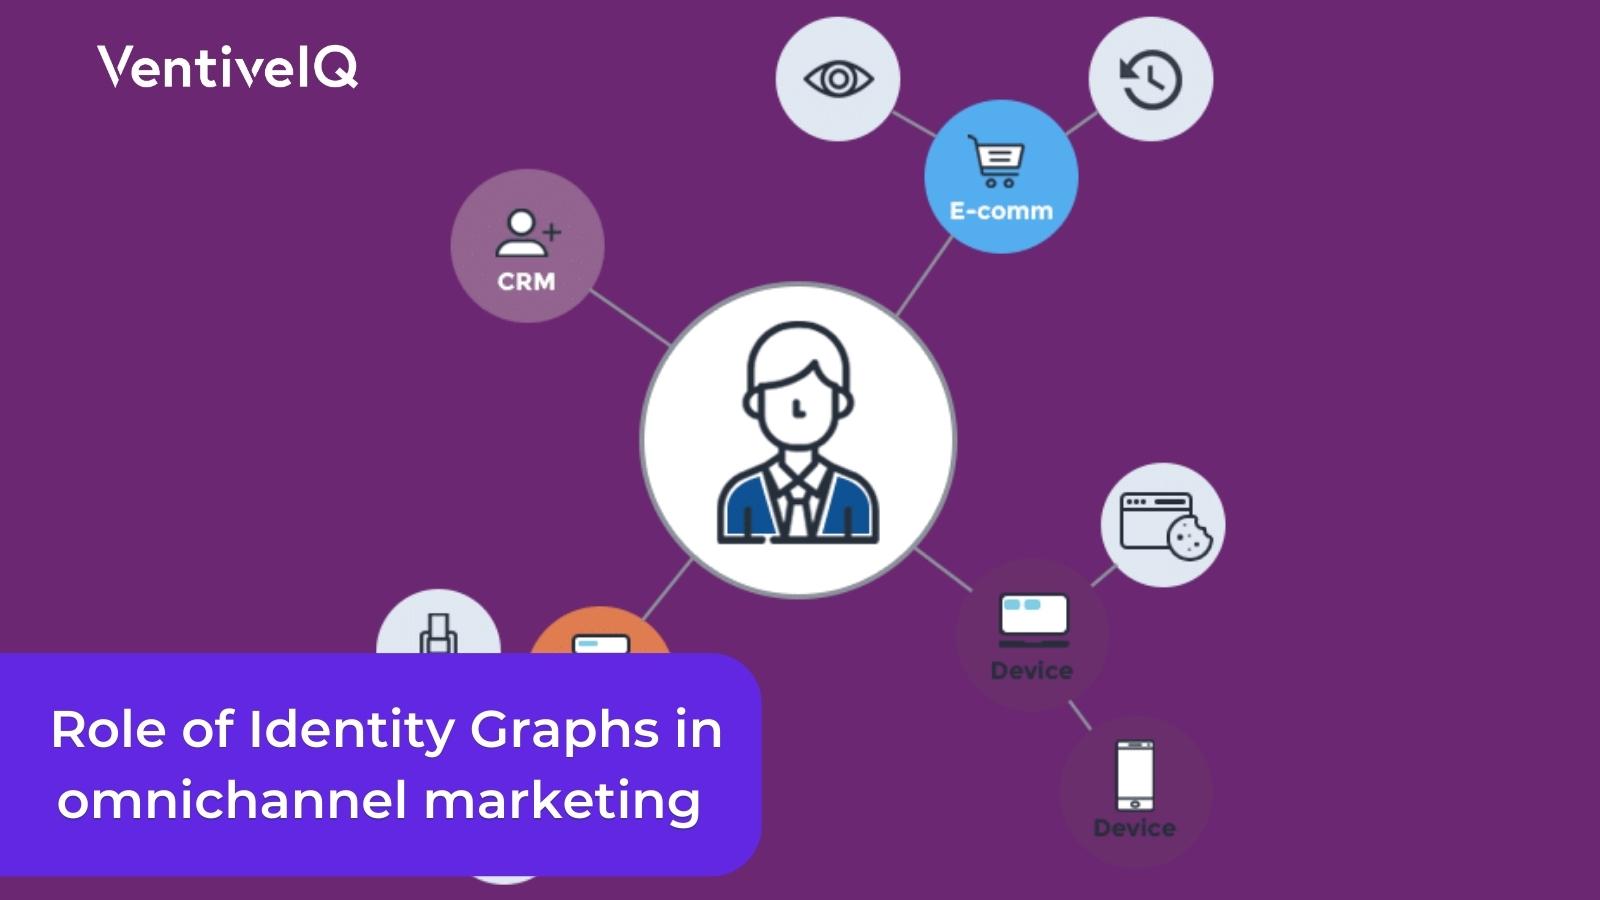 The Role of Identity Graphs in omnichannel marketing campaigns